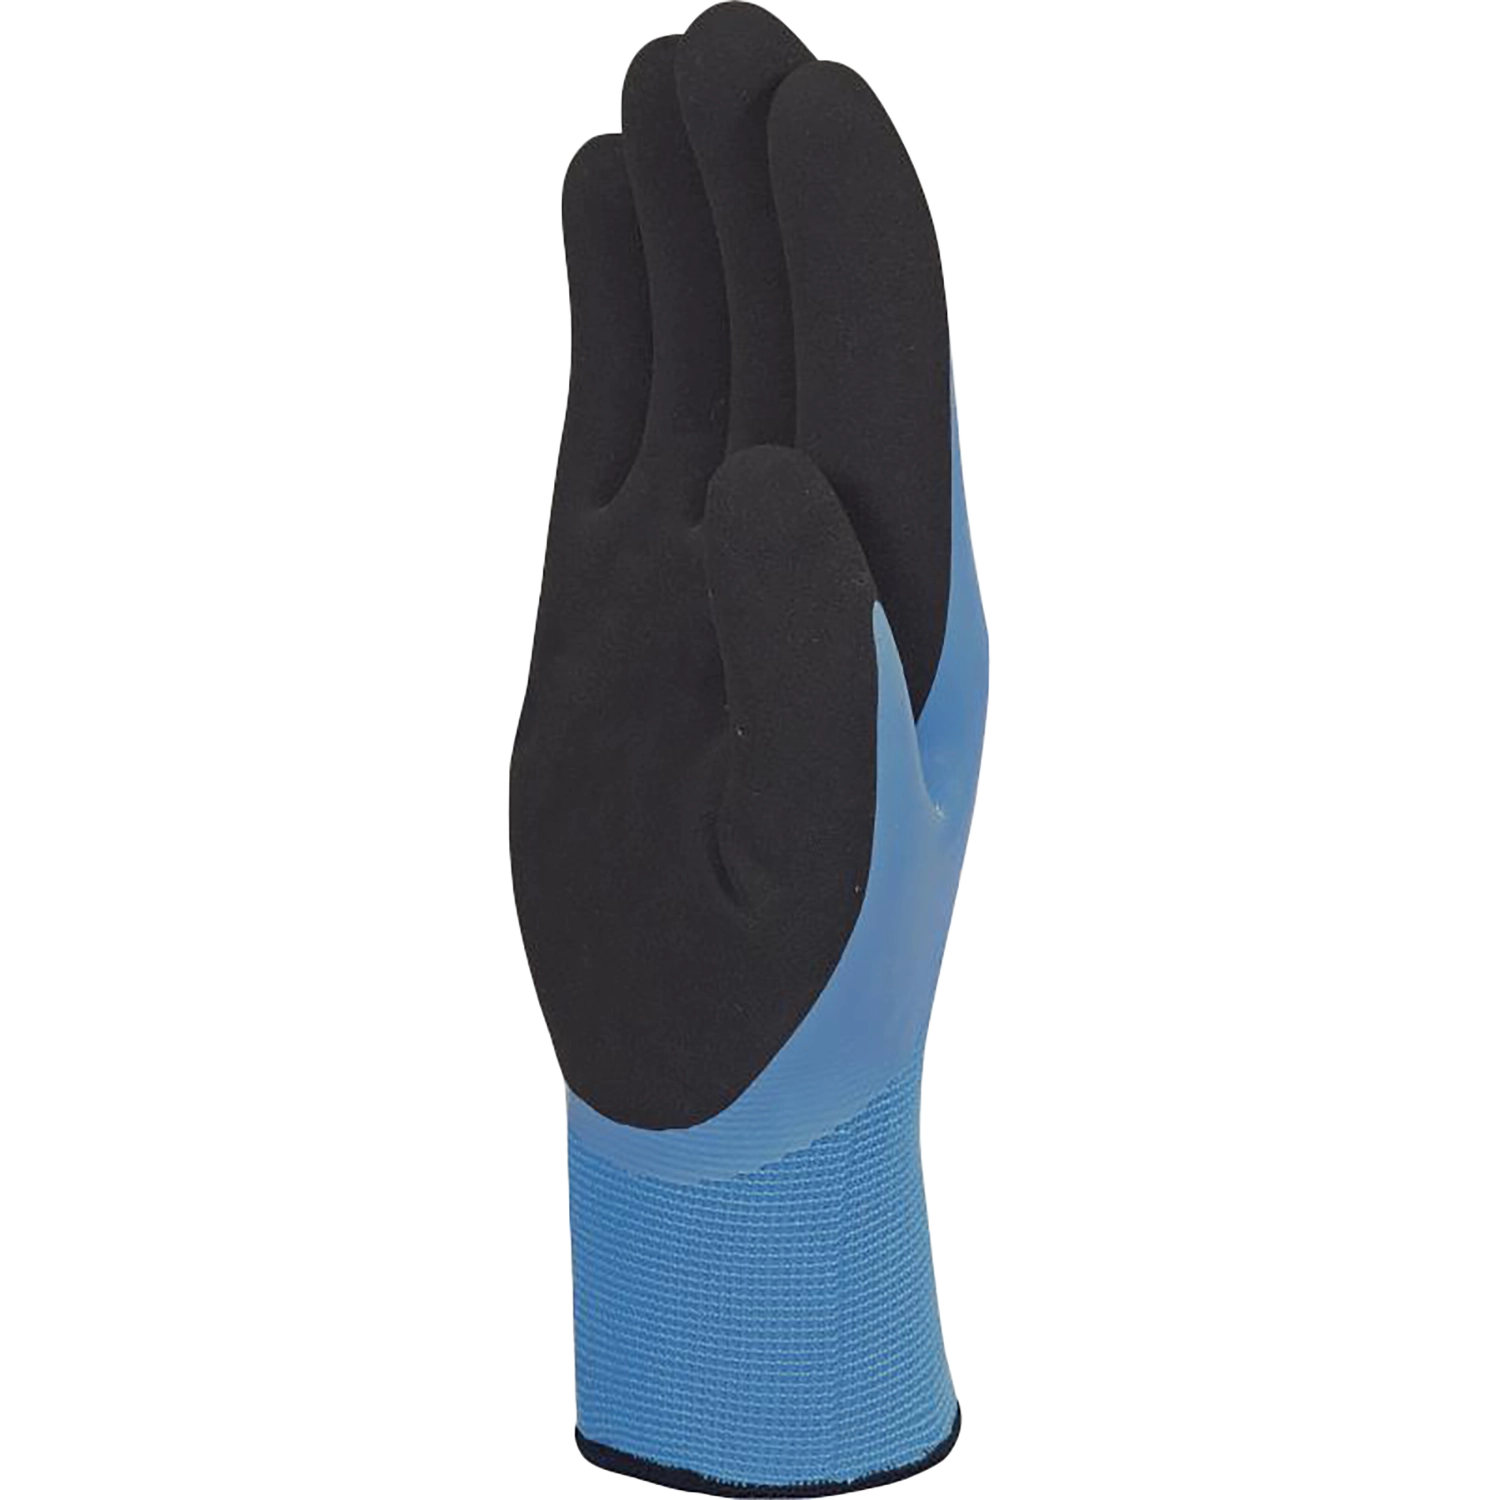 Gants d'hiver acrylique/polyamide - Thrym - taille 10